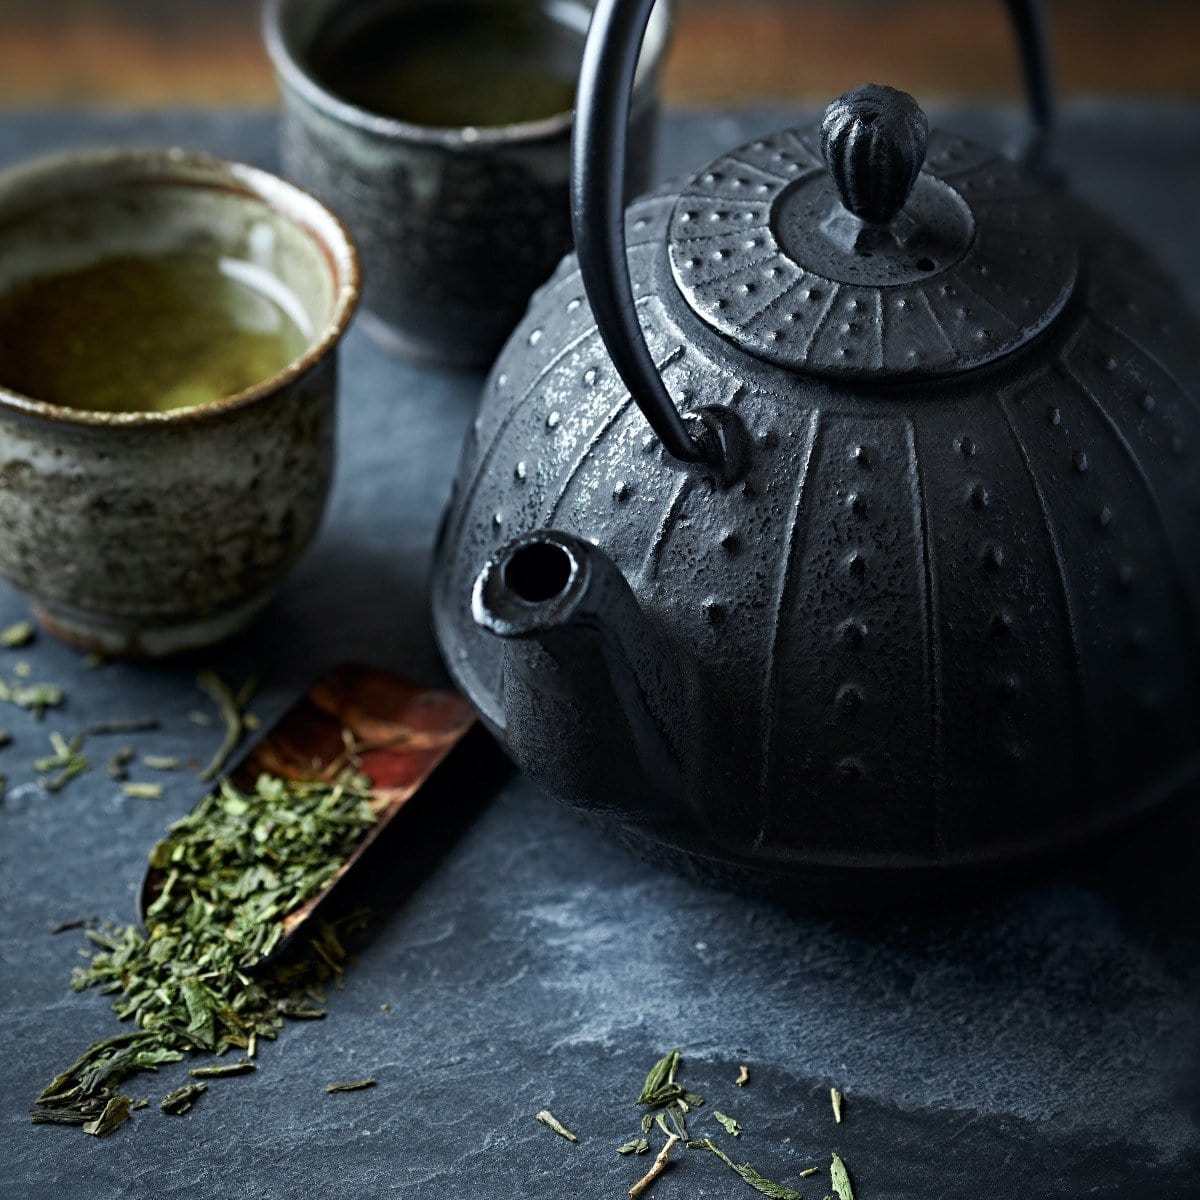 A close-up of a black, ornate cast iron teapot with two small ceramic cups filled with Sencha Kyoto Green Tea by Magic Hour on a dark slate surface. Loose leaf tea leaves and a wooden scoop are scattered around, adding to the rustic, tranquil setting.